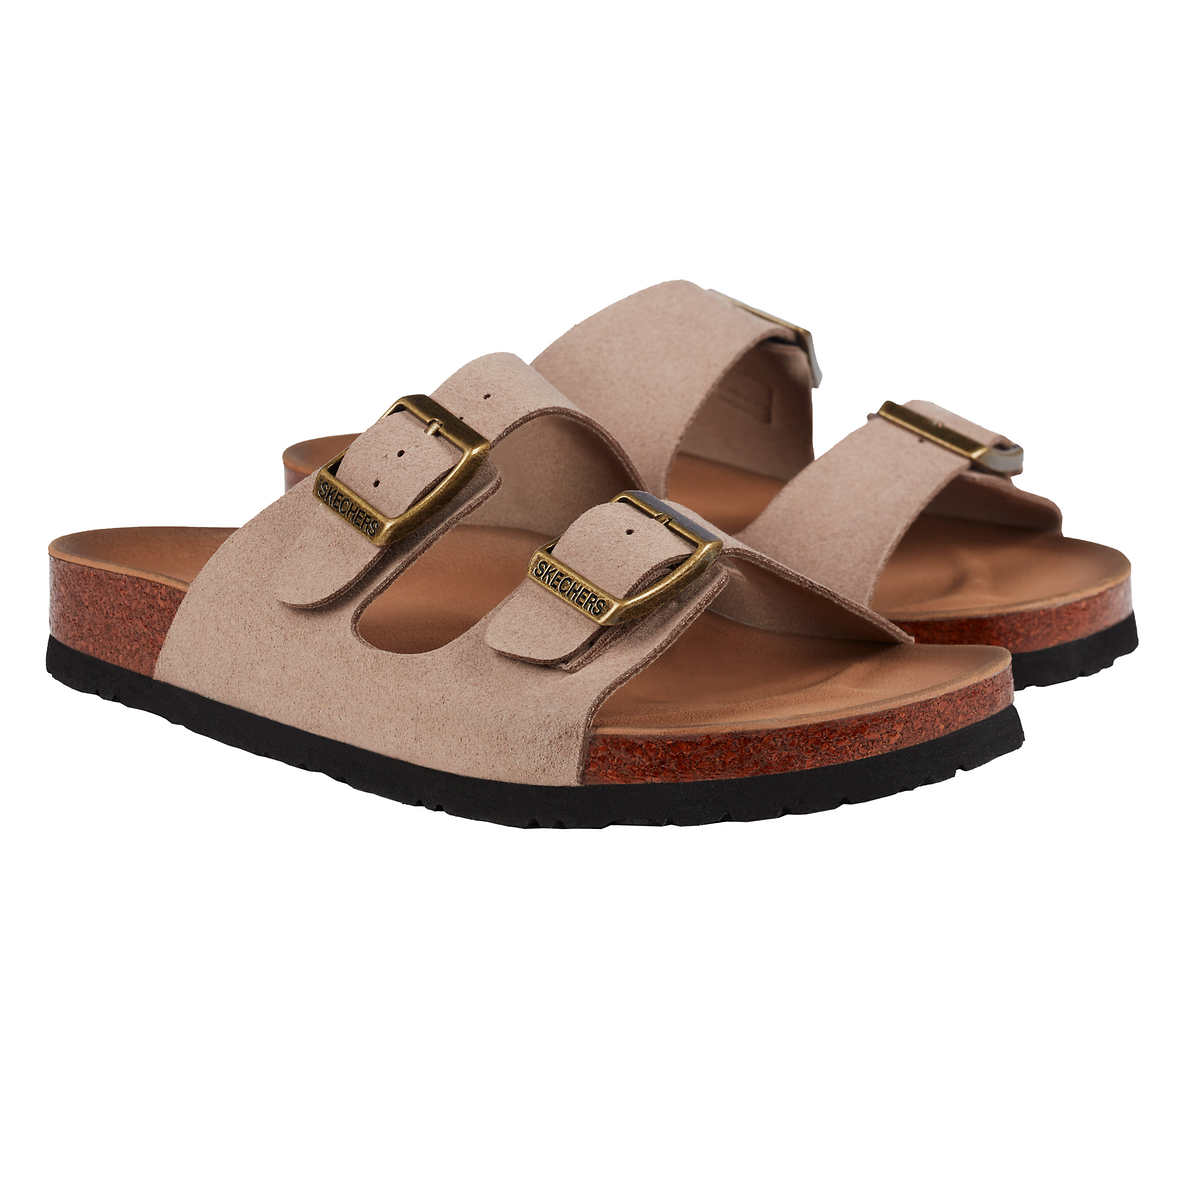 Skechers Ladies Two Strap Sandal Black and Brown Sizes 6, 9, 11.